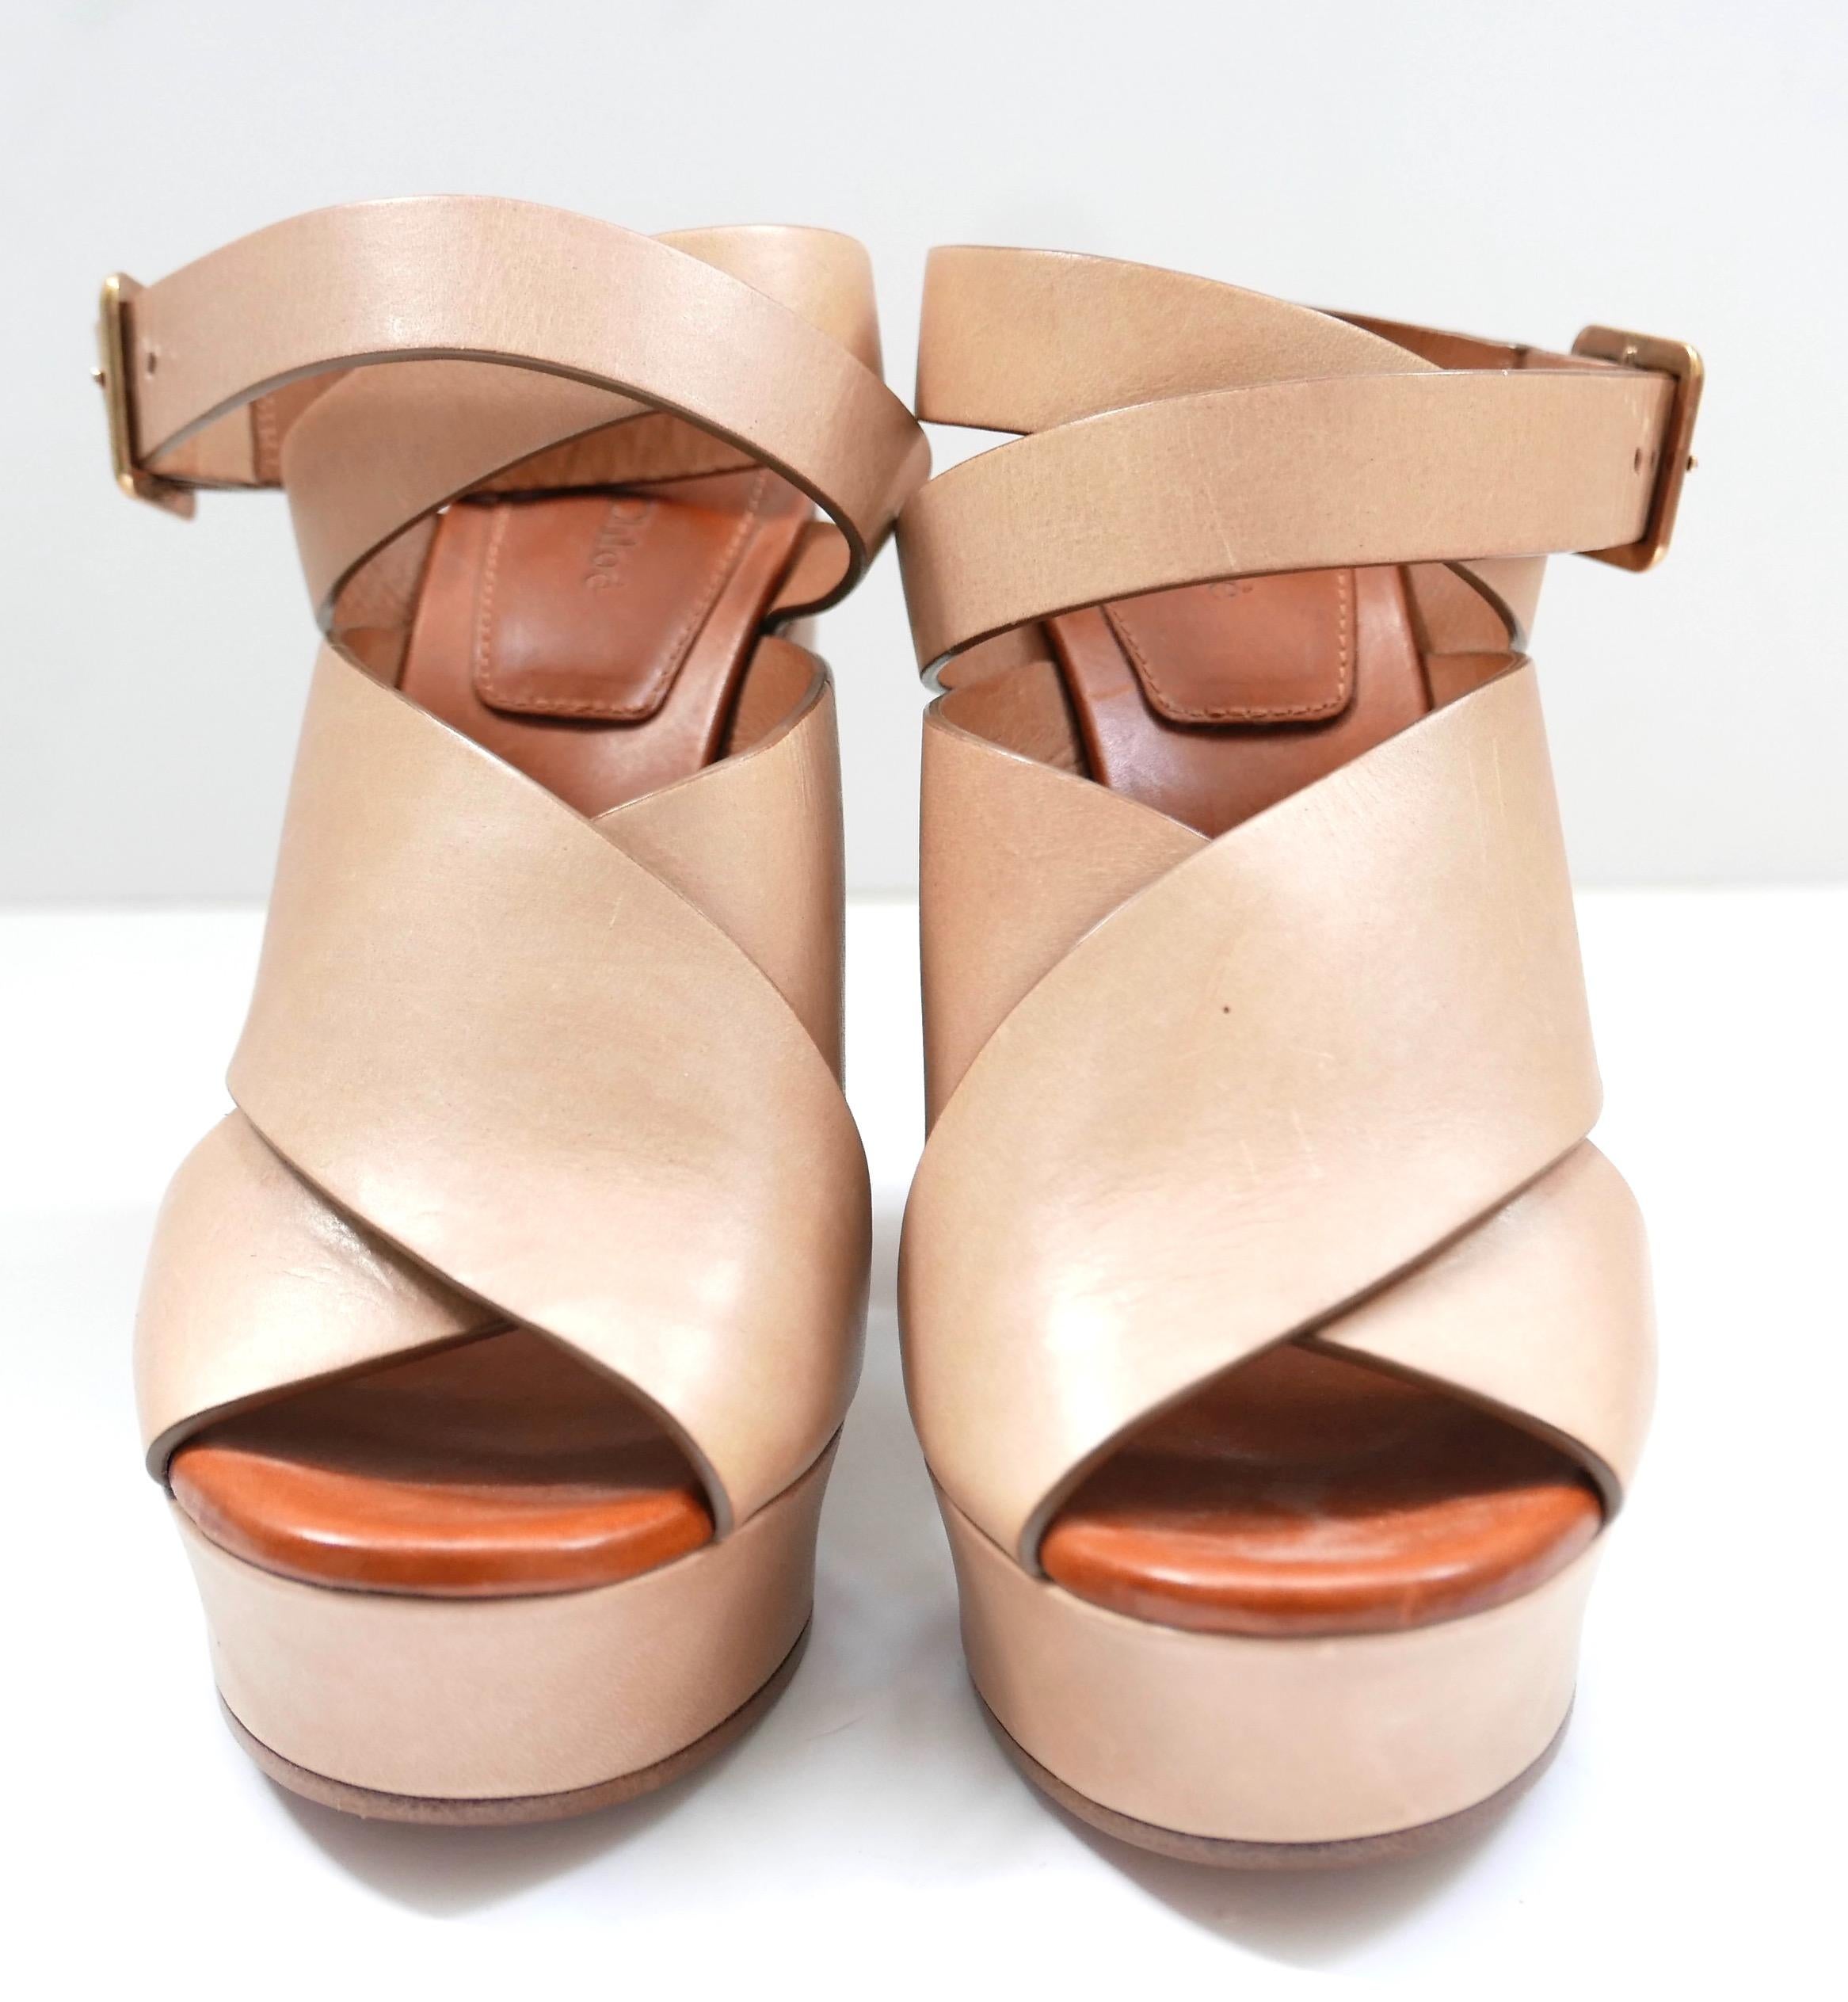 Iconic Chloe chunky strap, block heel sandals. Unworn with 1 x dustbag. Made from thick camel coloured leather, they have brass ankle buckles, contrast padded footbeds and platform fronts. Size 36. Measures approx - 9.5” heel to toe, heel 4.25”,